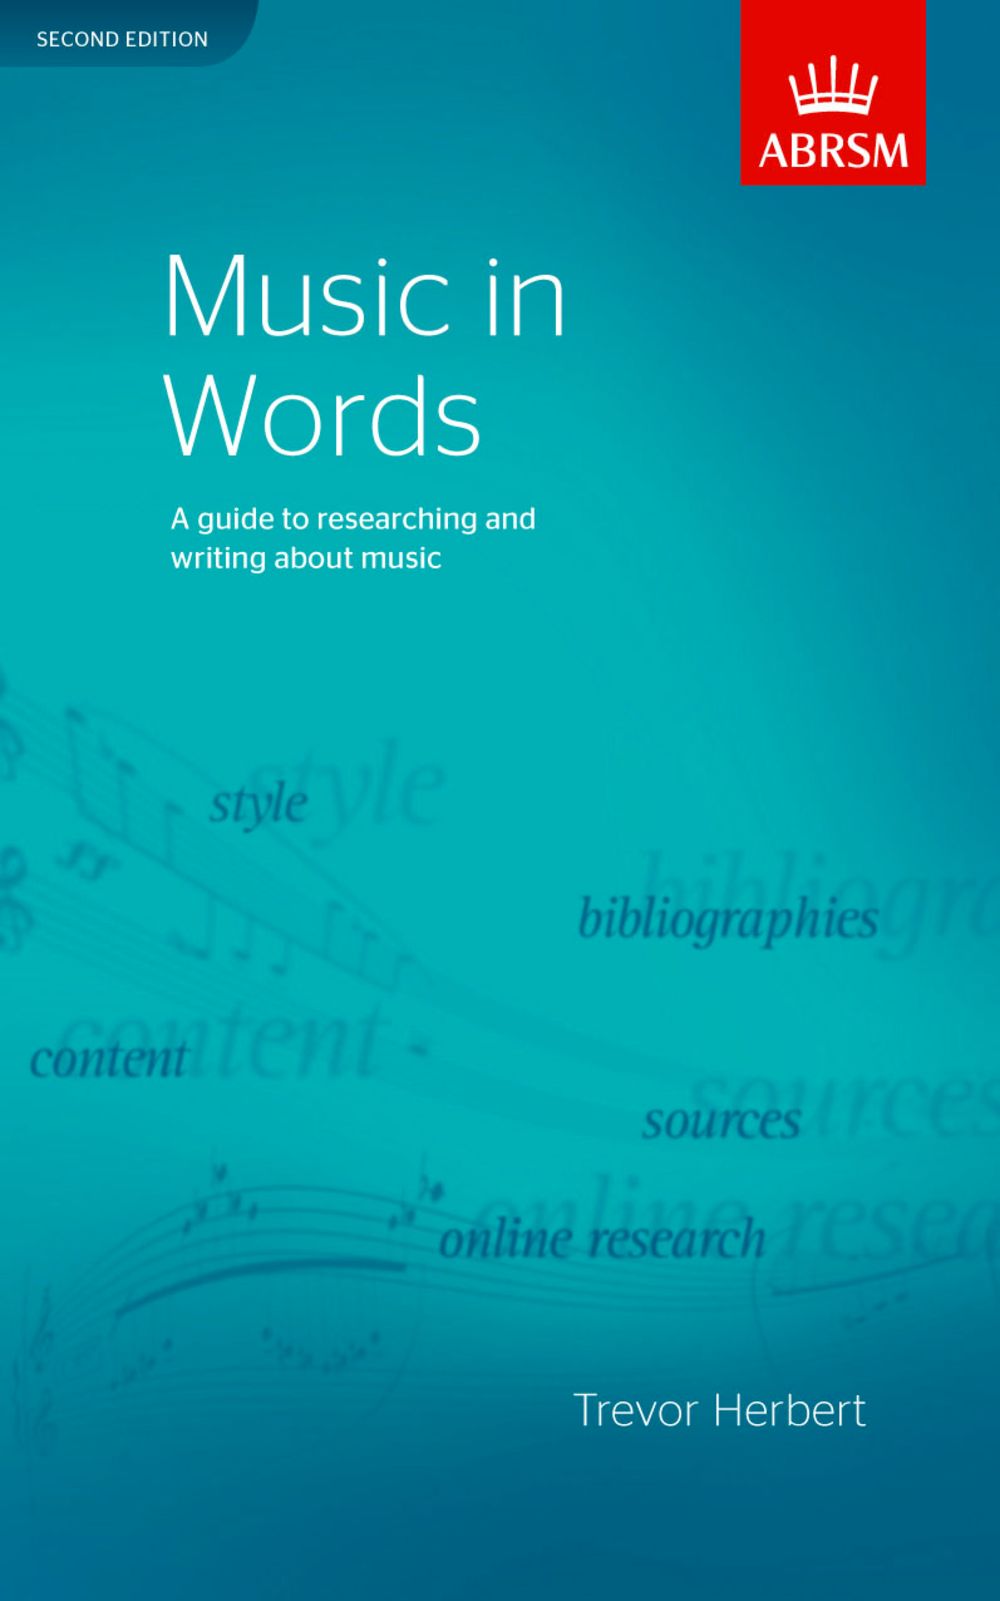 Trevor Herbert: Music in Words  Second Edition: Reference